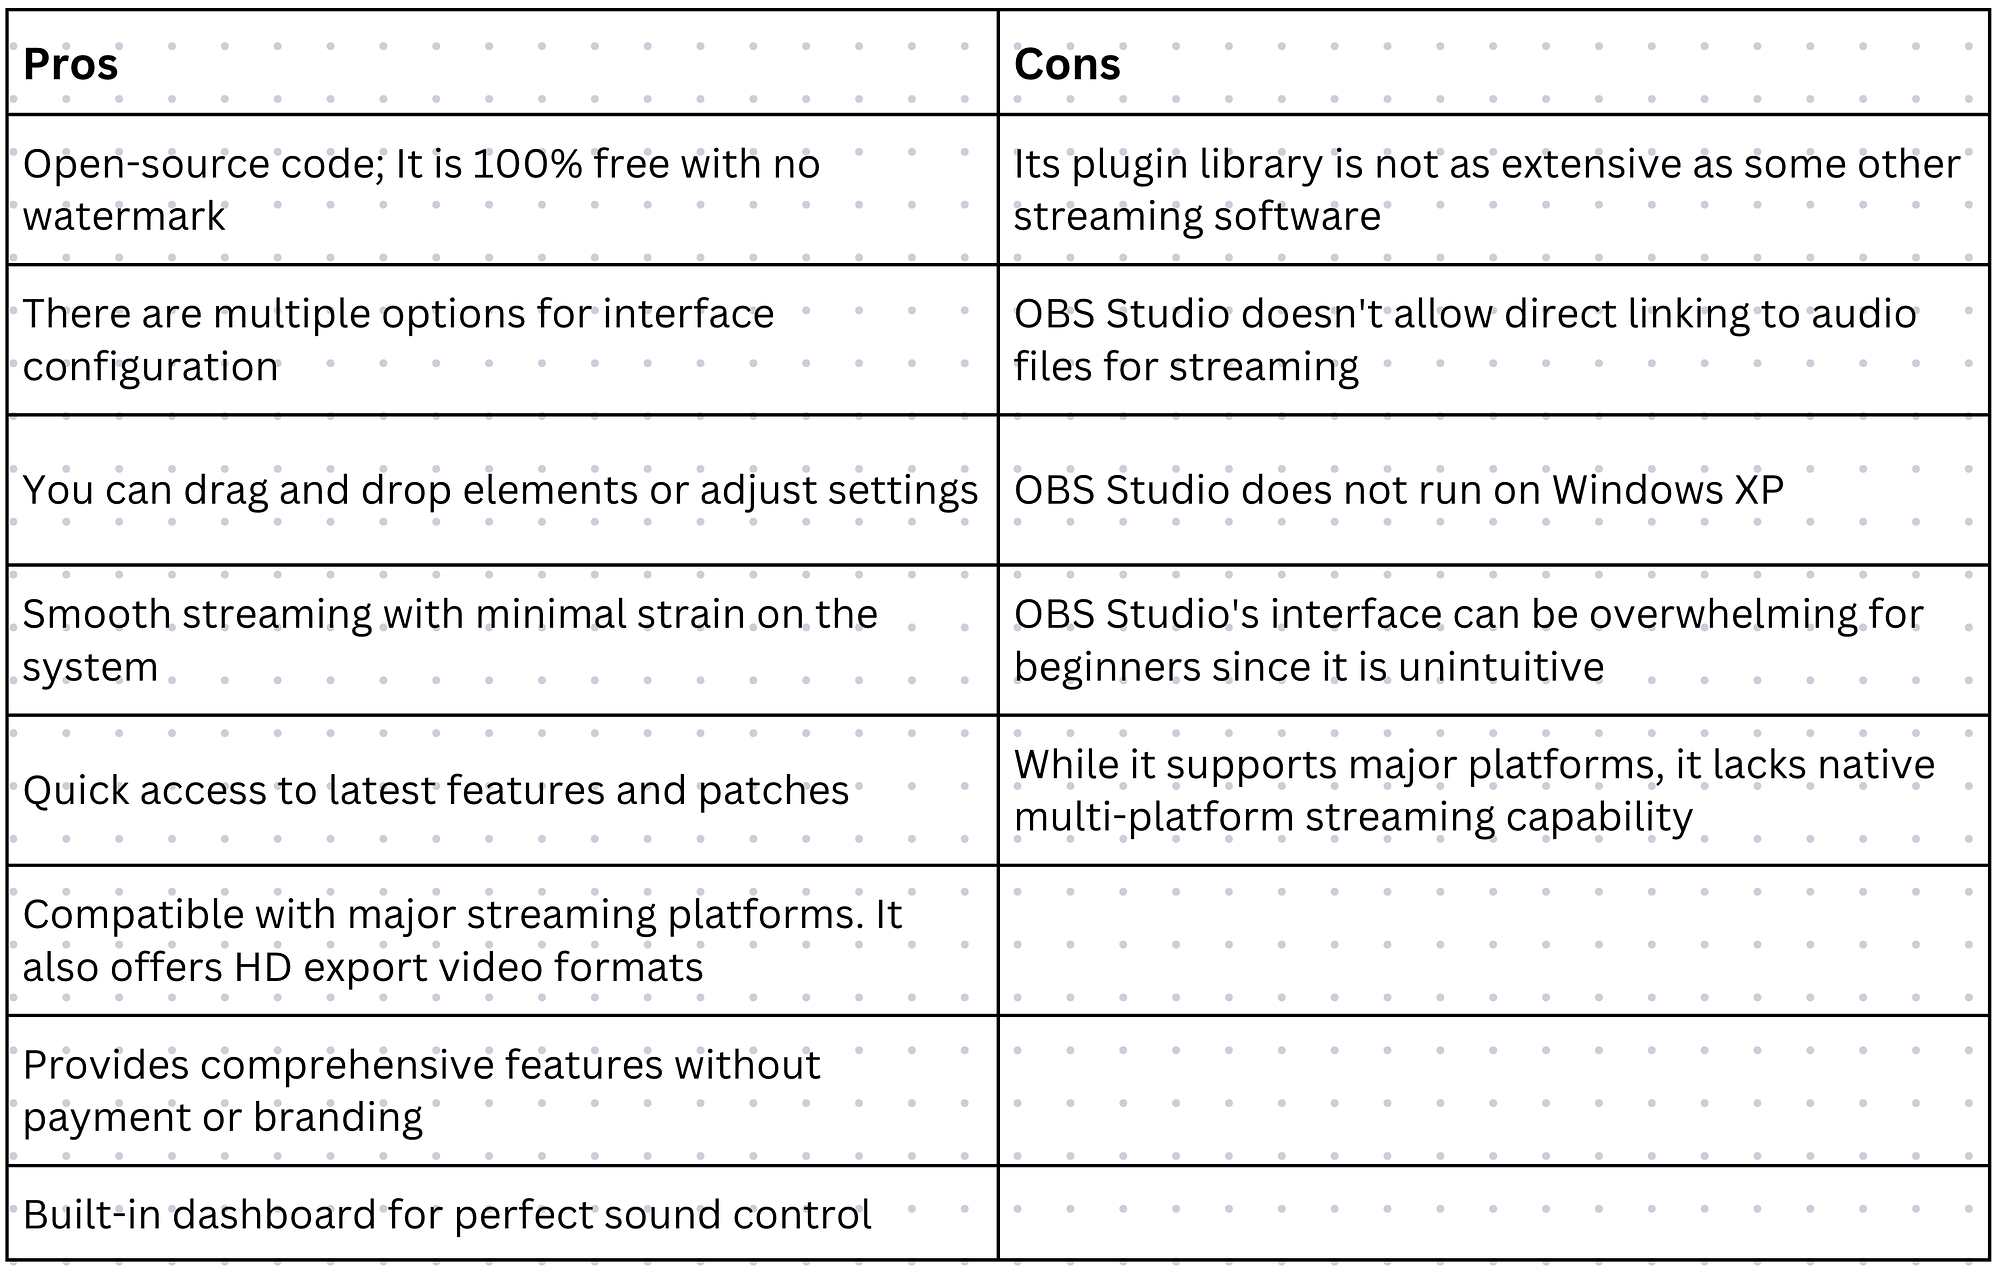 Pros and Cons of OBS